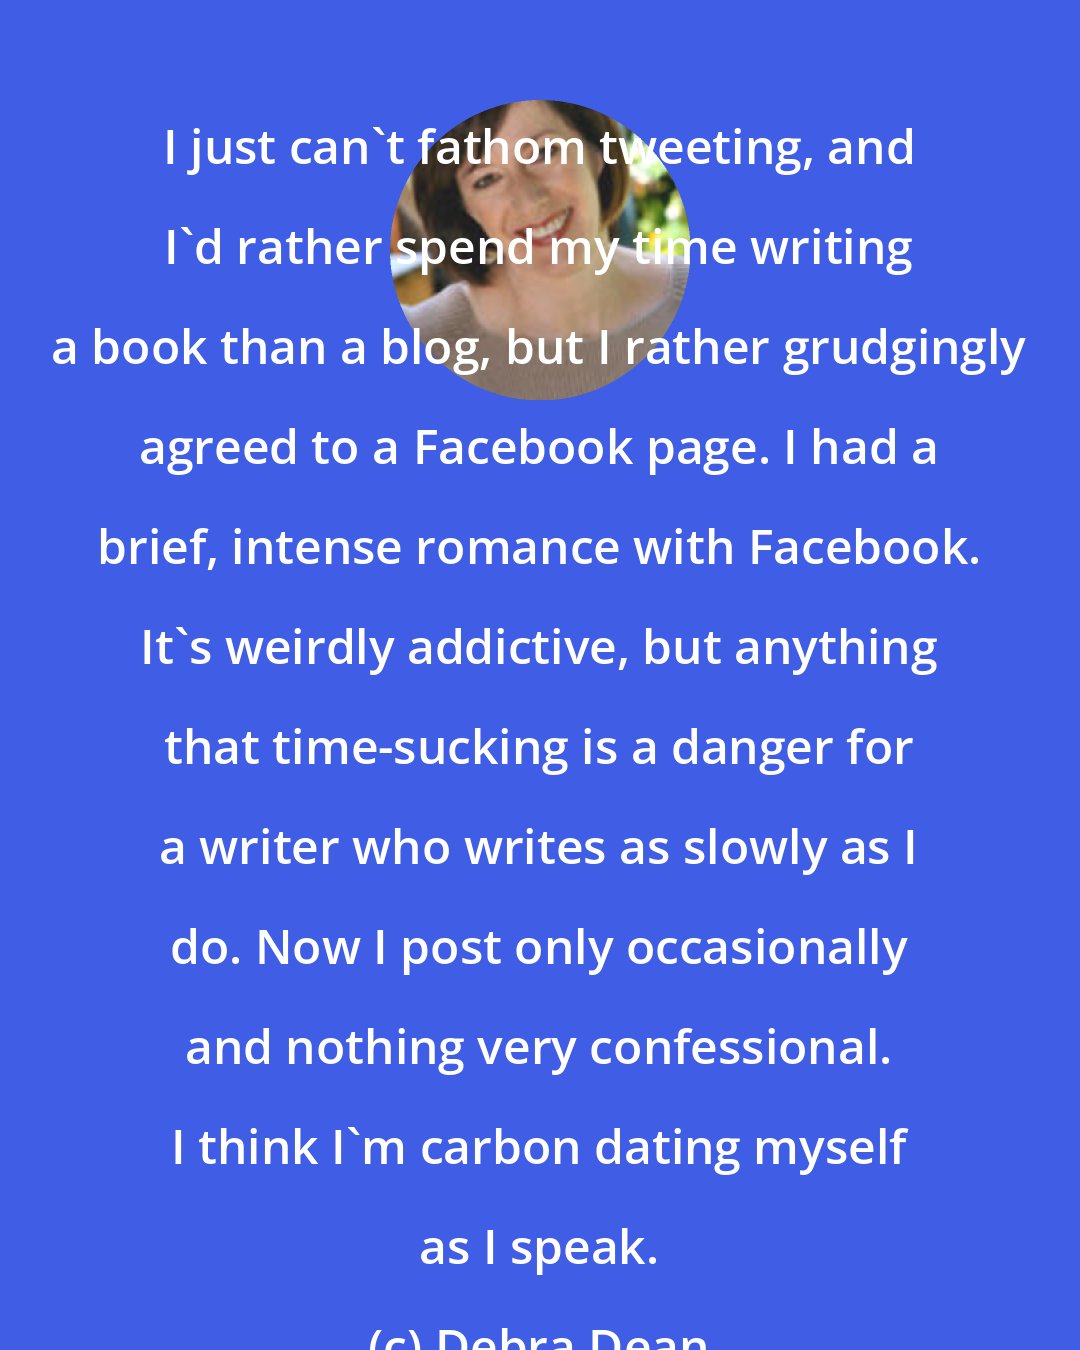 Debra Dean: I just can't fathom tweeting, and I'd rather spend my time writing a book than a blog, but I rather grudgingly agreed to a Facebook page. I had a brief, intense romance with Facebook. It's weirdly addictive, but anything that time-sucking is a danger for a writer who writes as slowly as I do. Now I post only occasionally and nothing very confessional. I think I'm carbon dating myself as I speak.